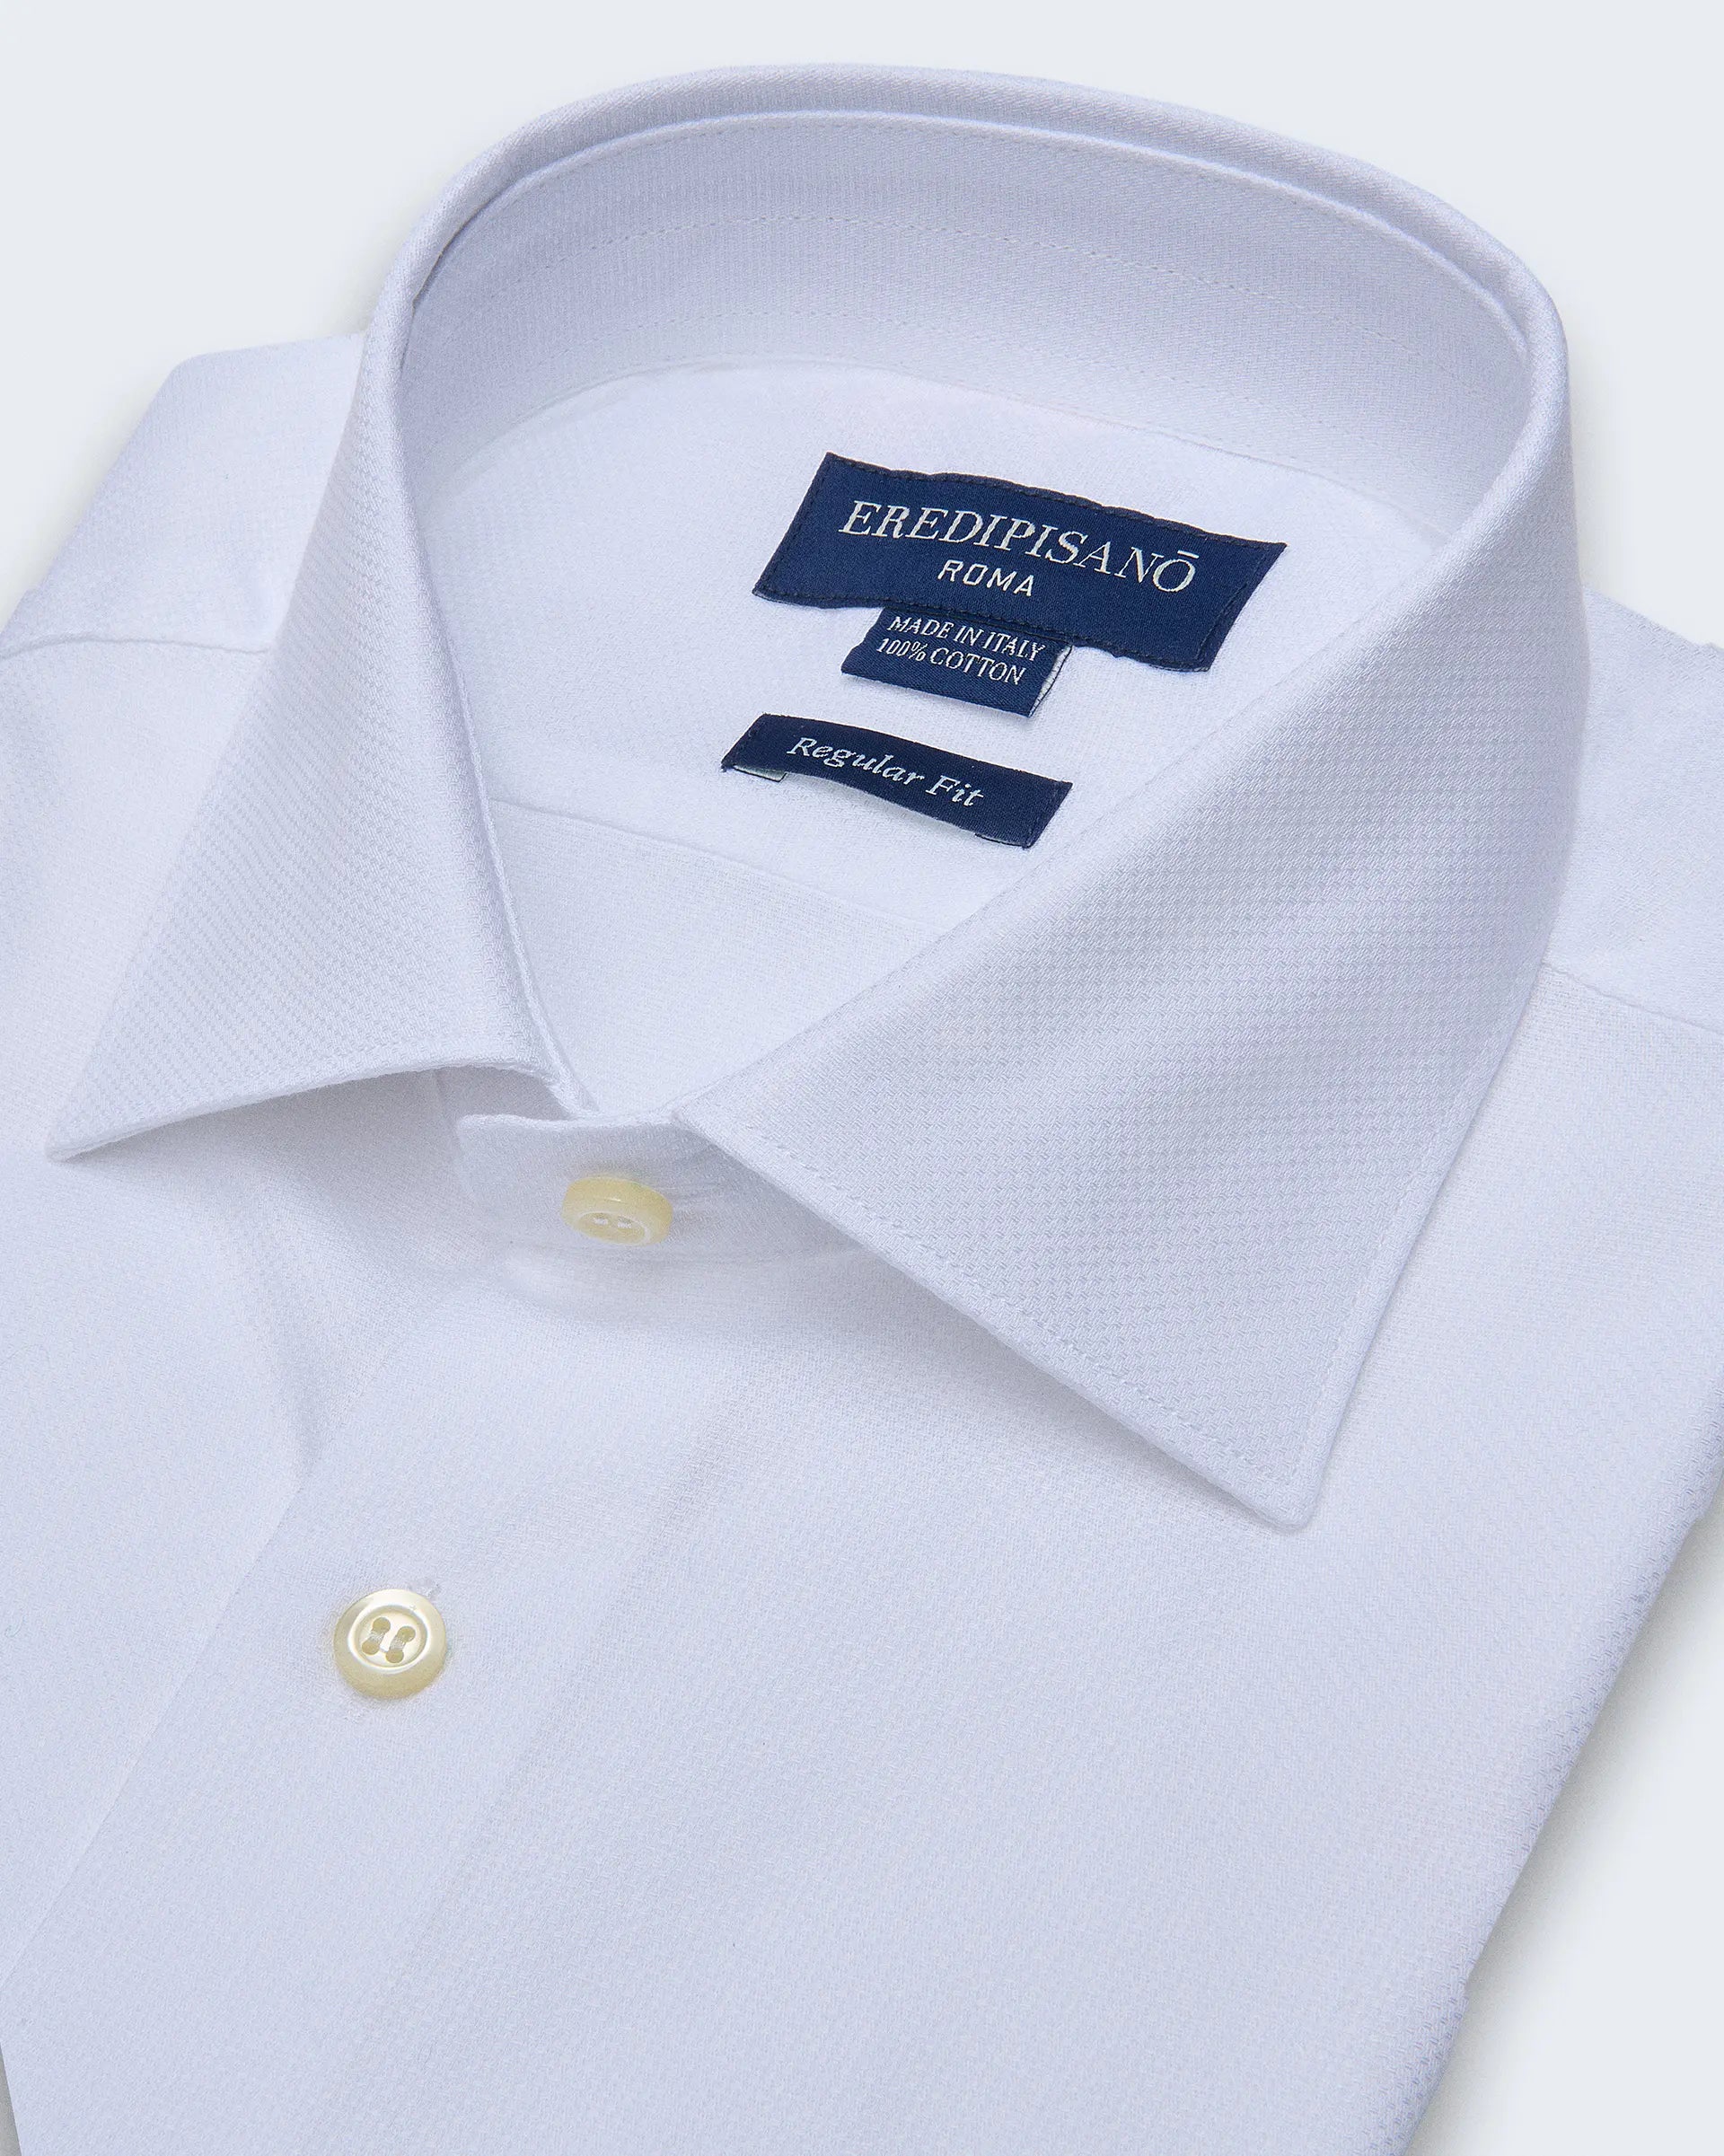 White Shirt Oxford Regular Fit with Cutaway Collar